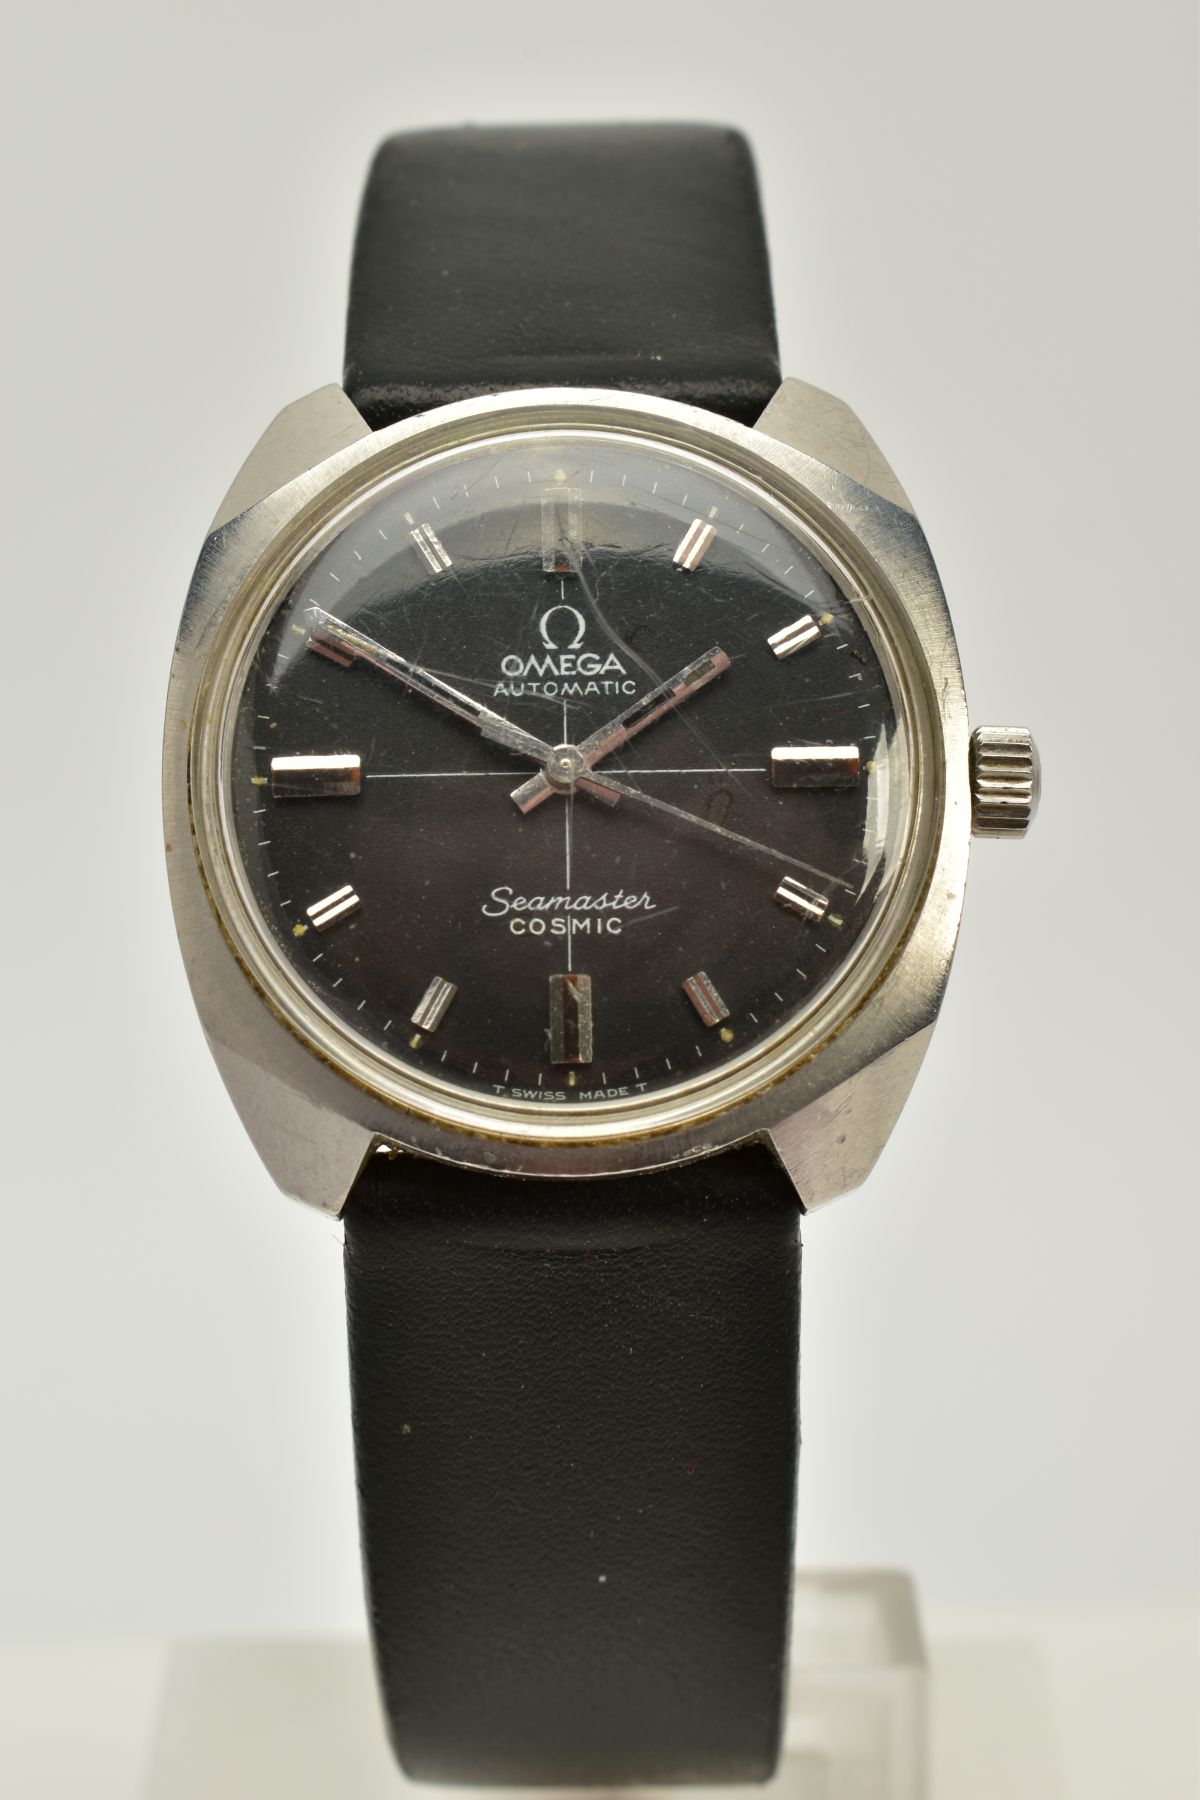 A GENTS OMEGA AUTOMATIC SEAMASTER COSMIC WRISTWATCH, black dial, baton markers, silver coloured